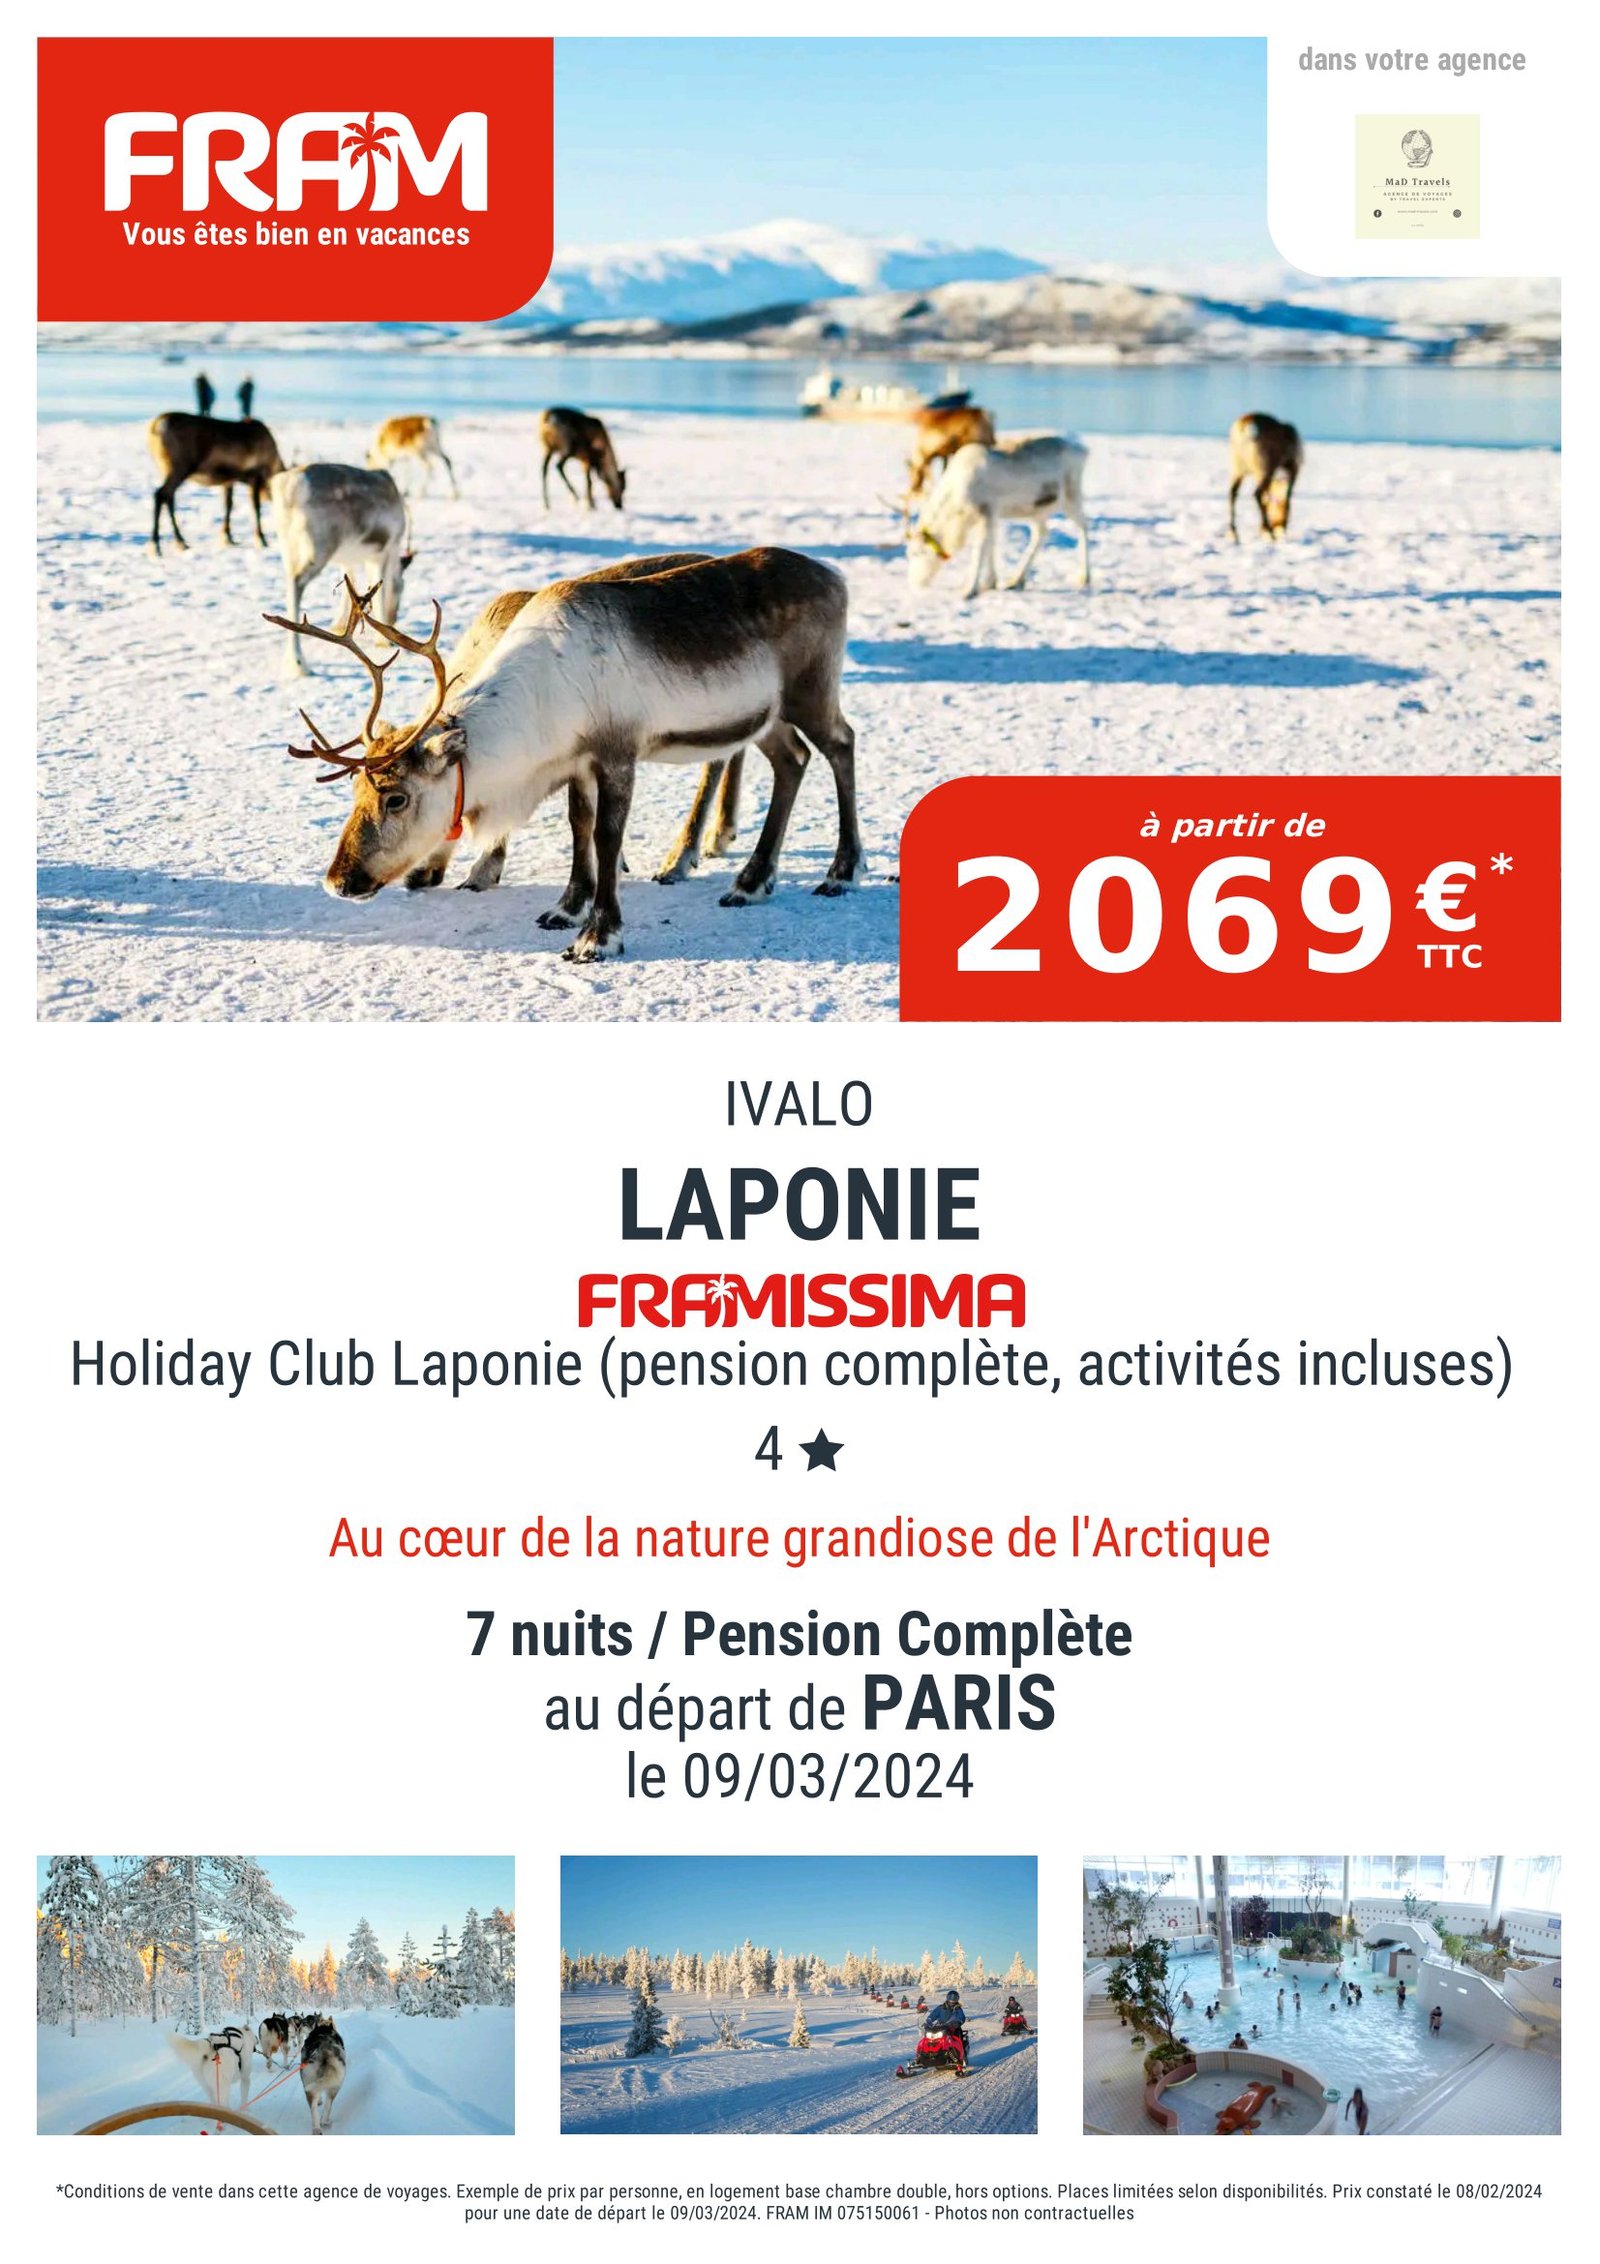 Promotions Mad Travels - Laponie